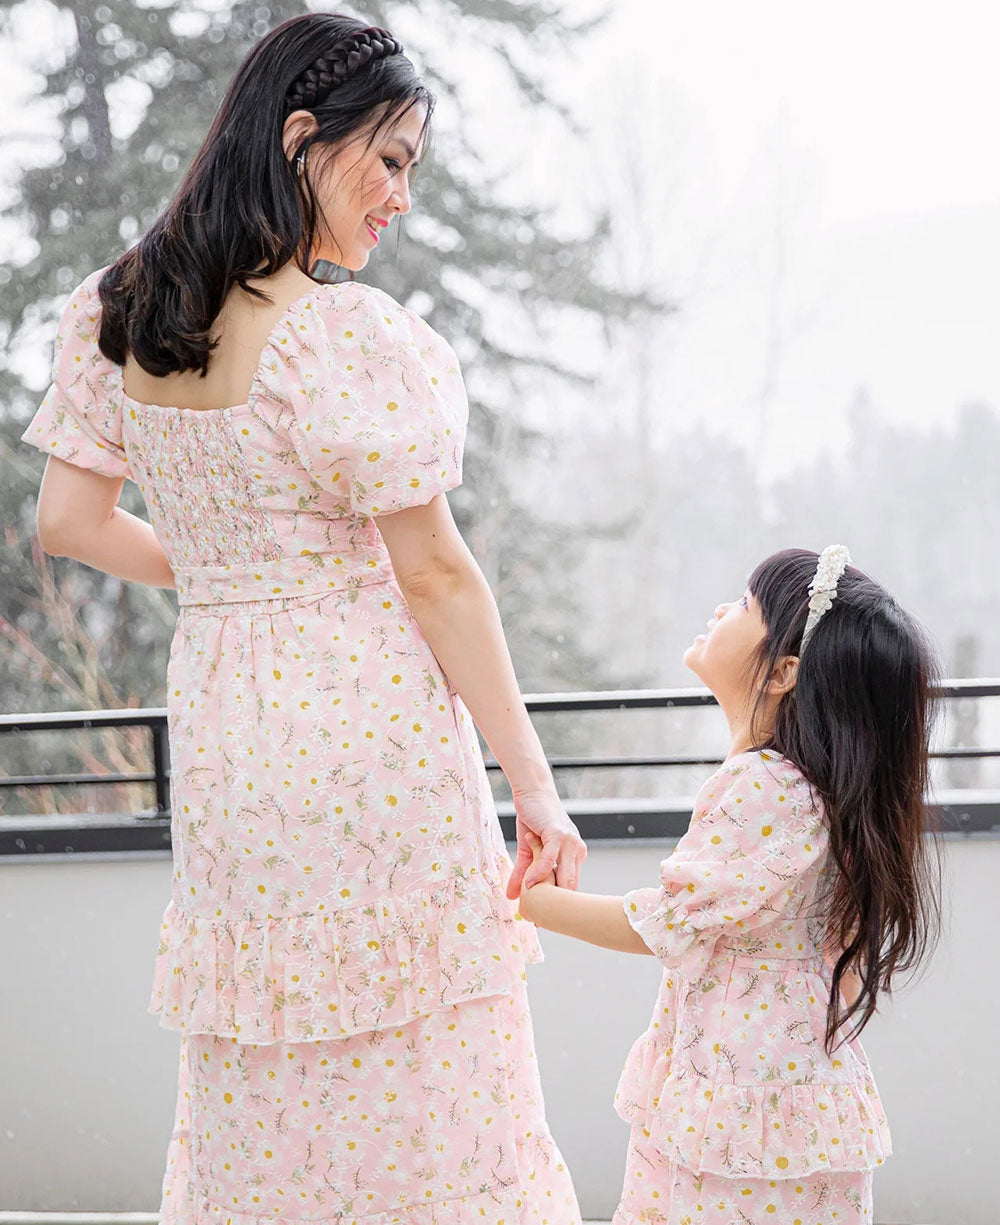 Where To Find Summer Breastfeeding Dresses - A Baby on Board blog